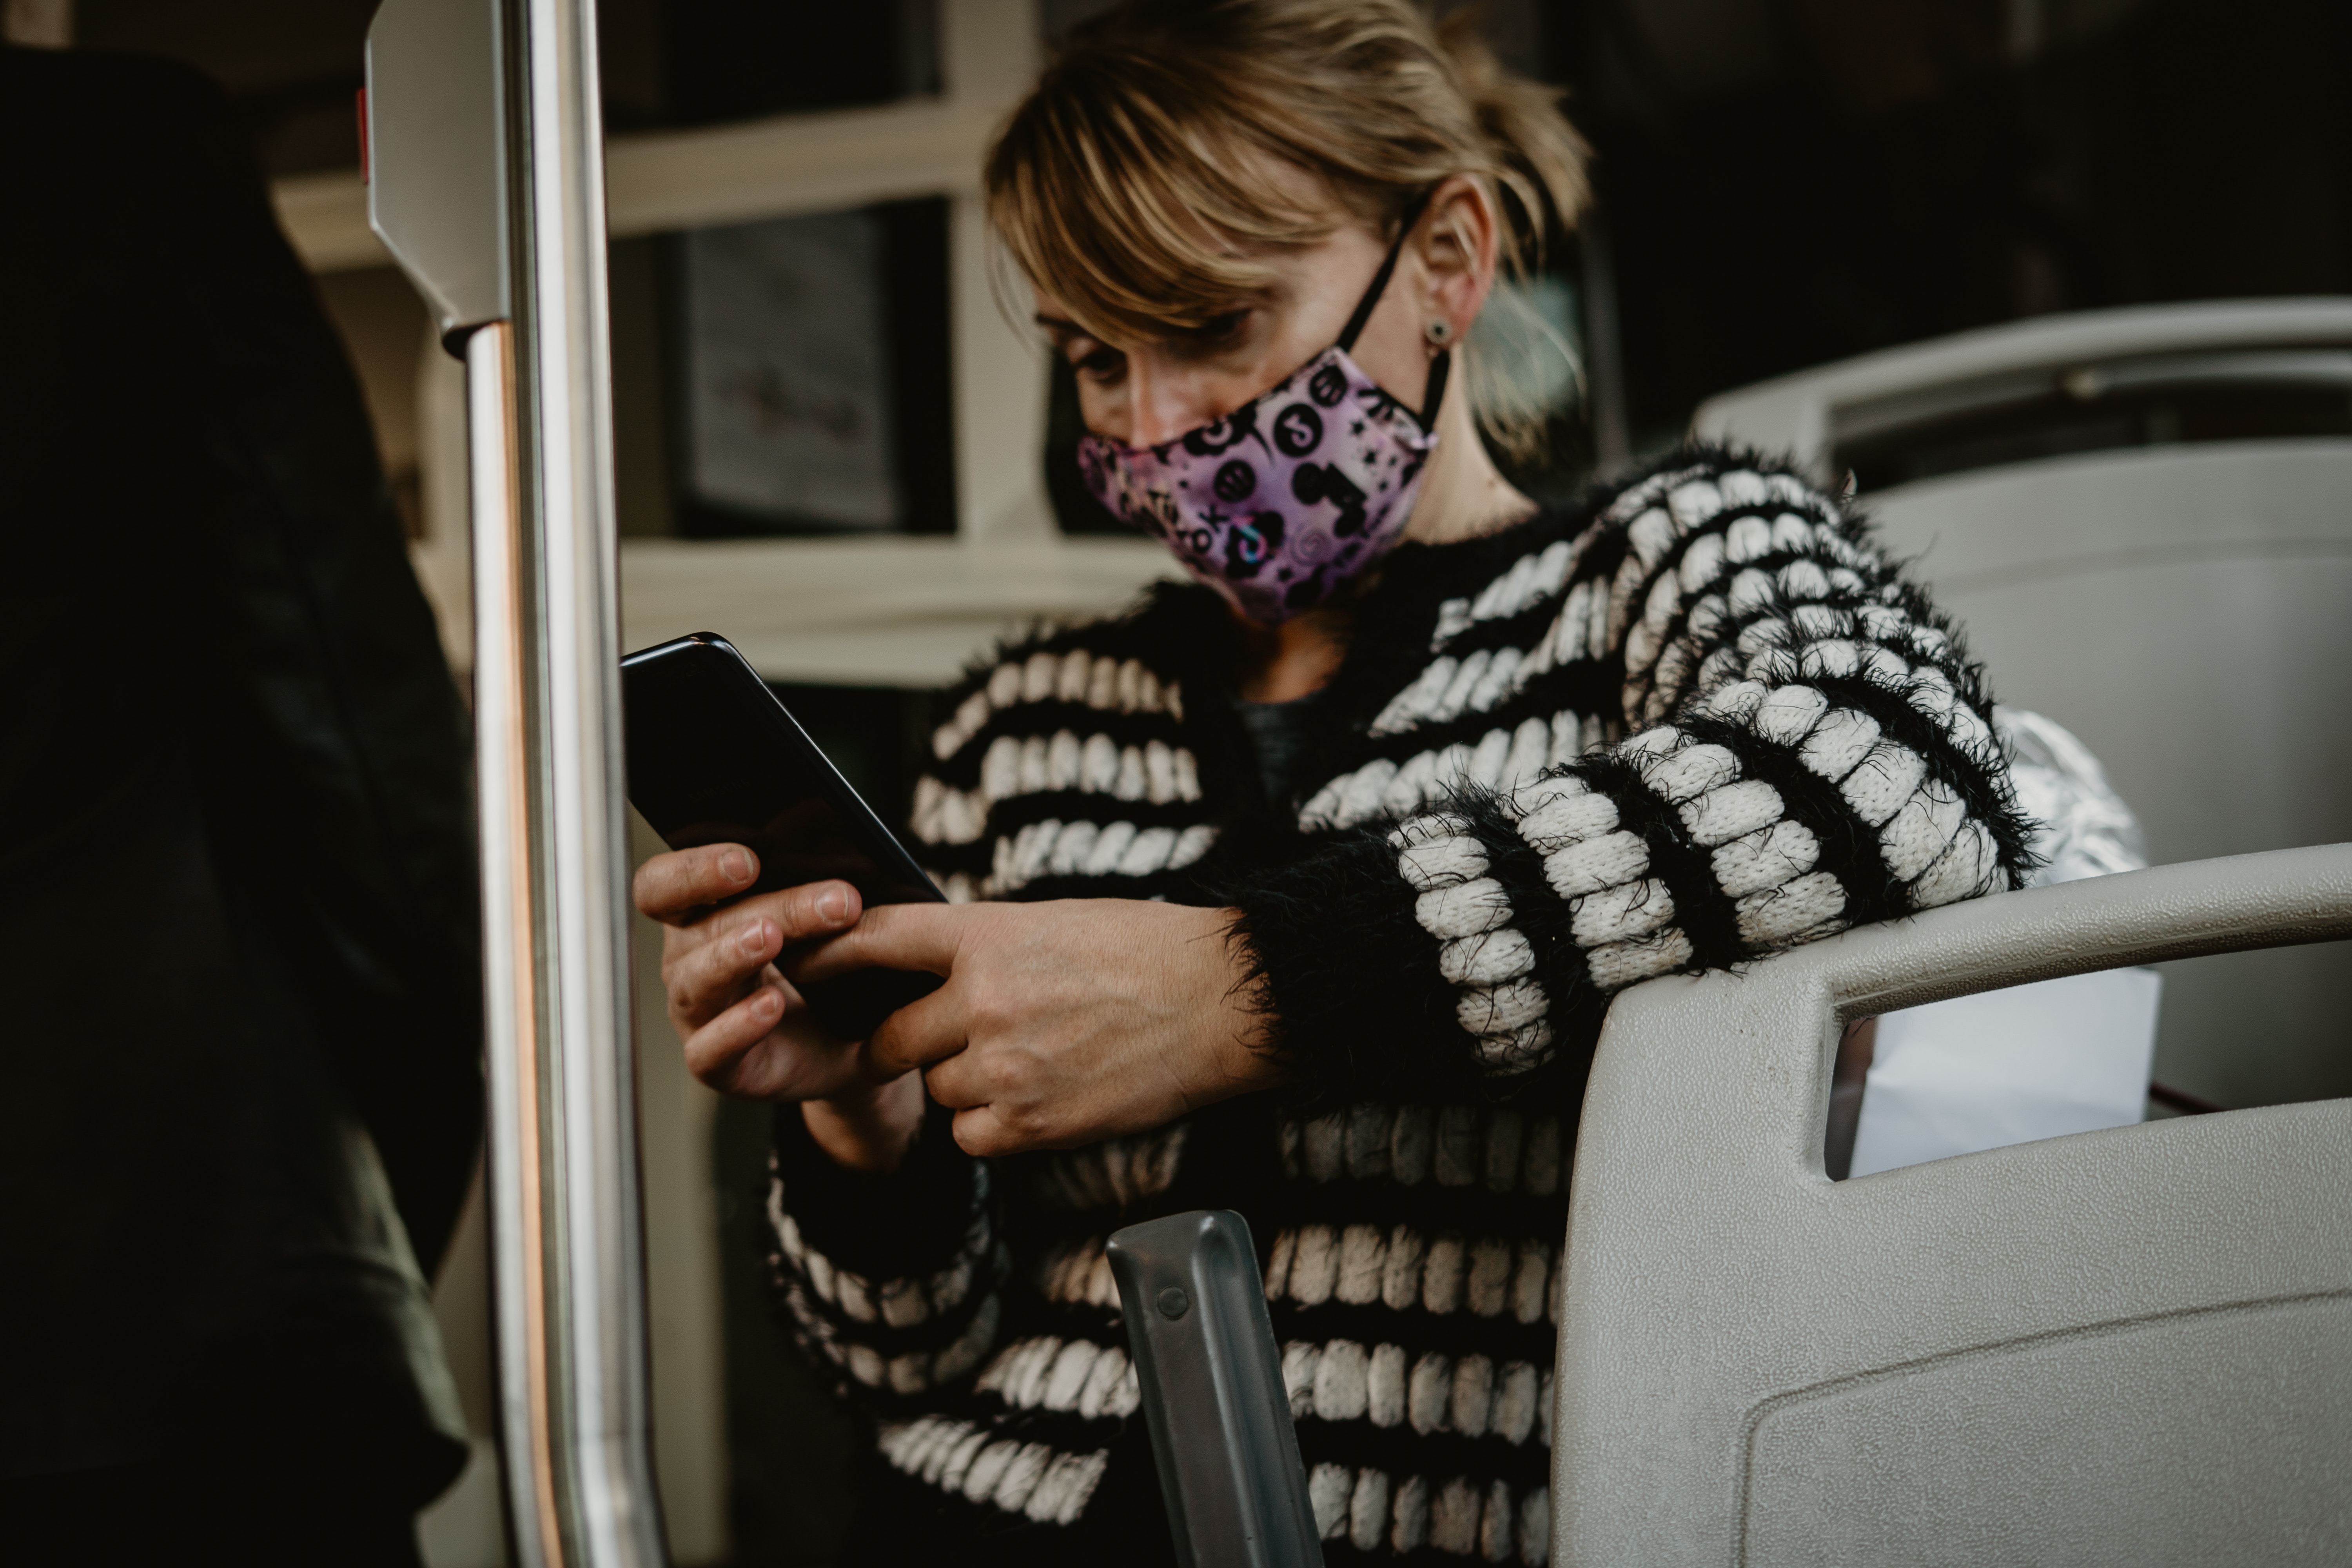 A woman in a face mask checks her mobile phone on a bus in Rome, Italy